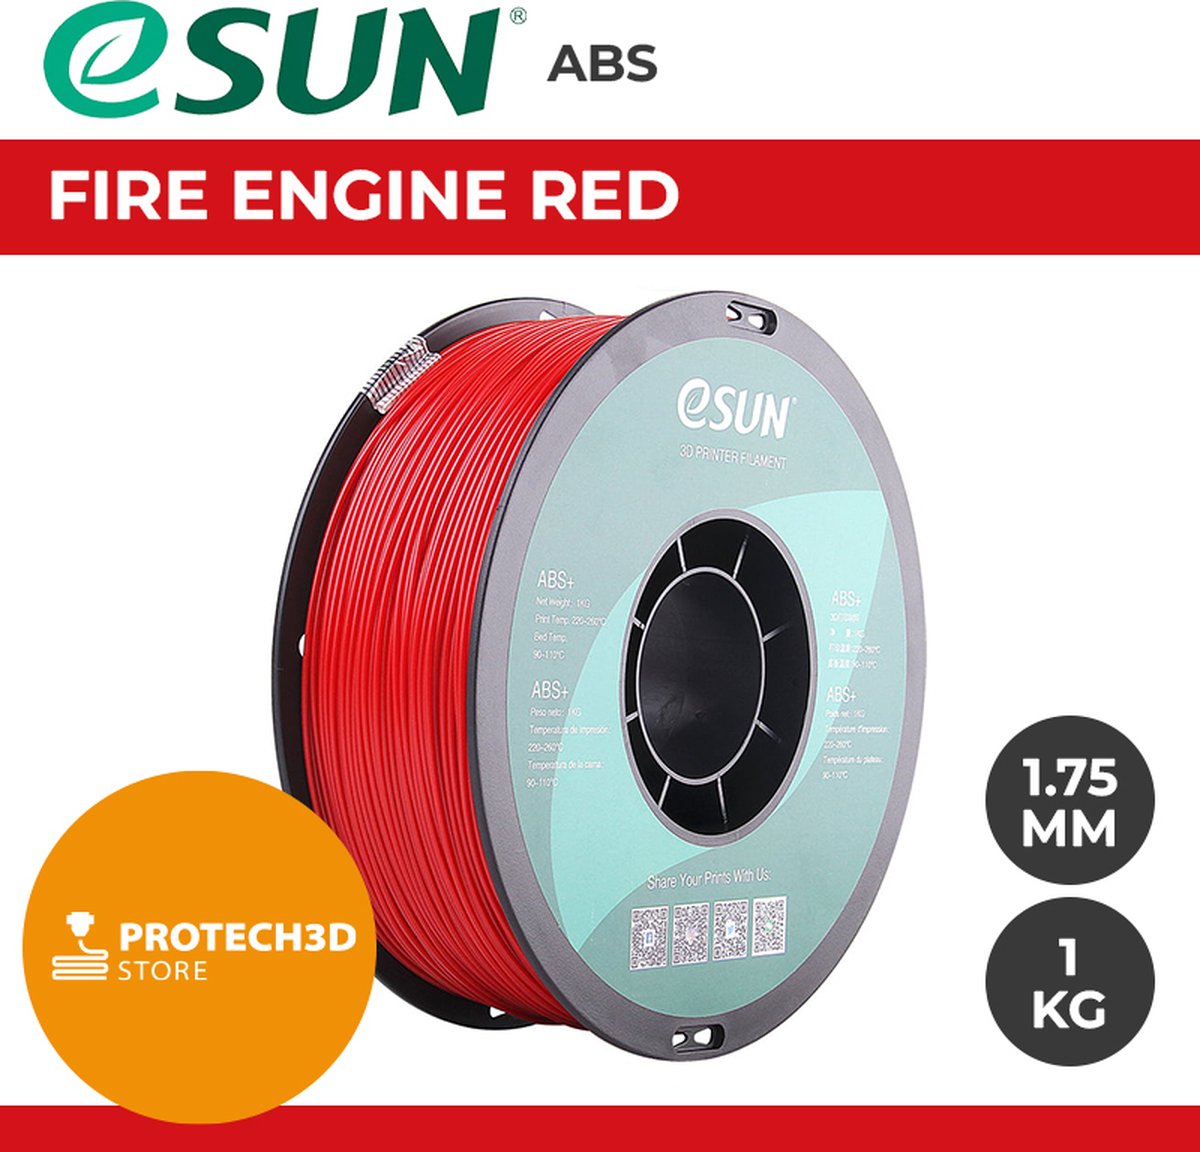 eSun - ABS Filament, 1.75mm, Fire Engine Red - 1kg